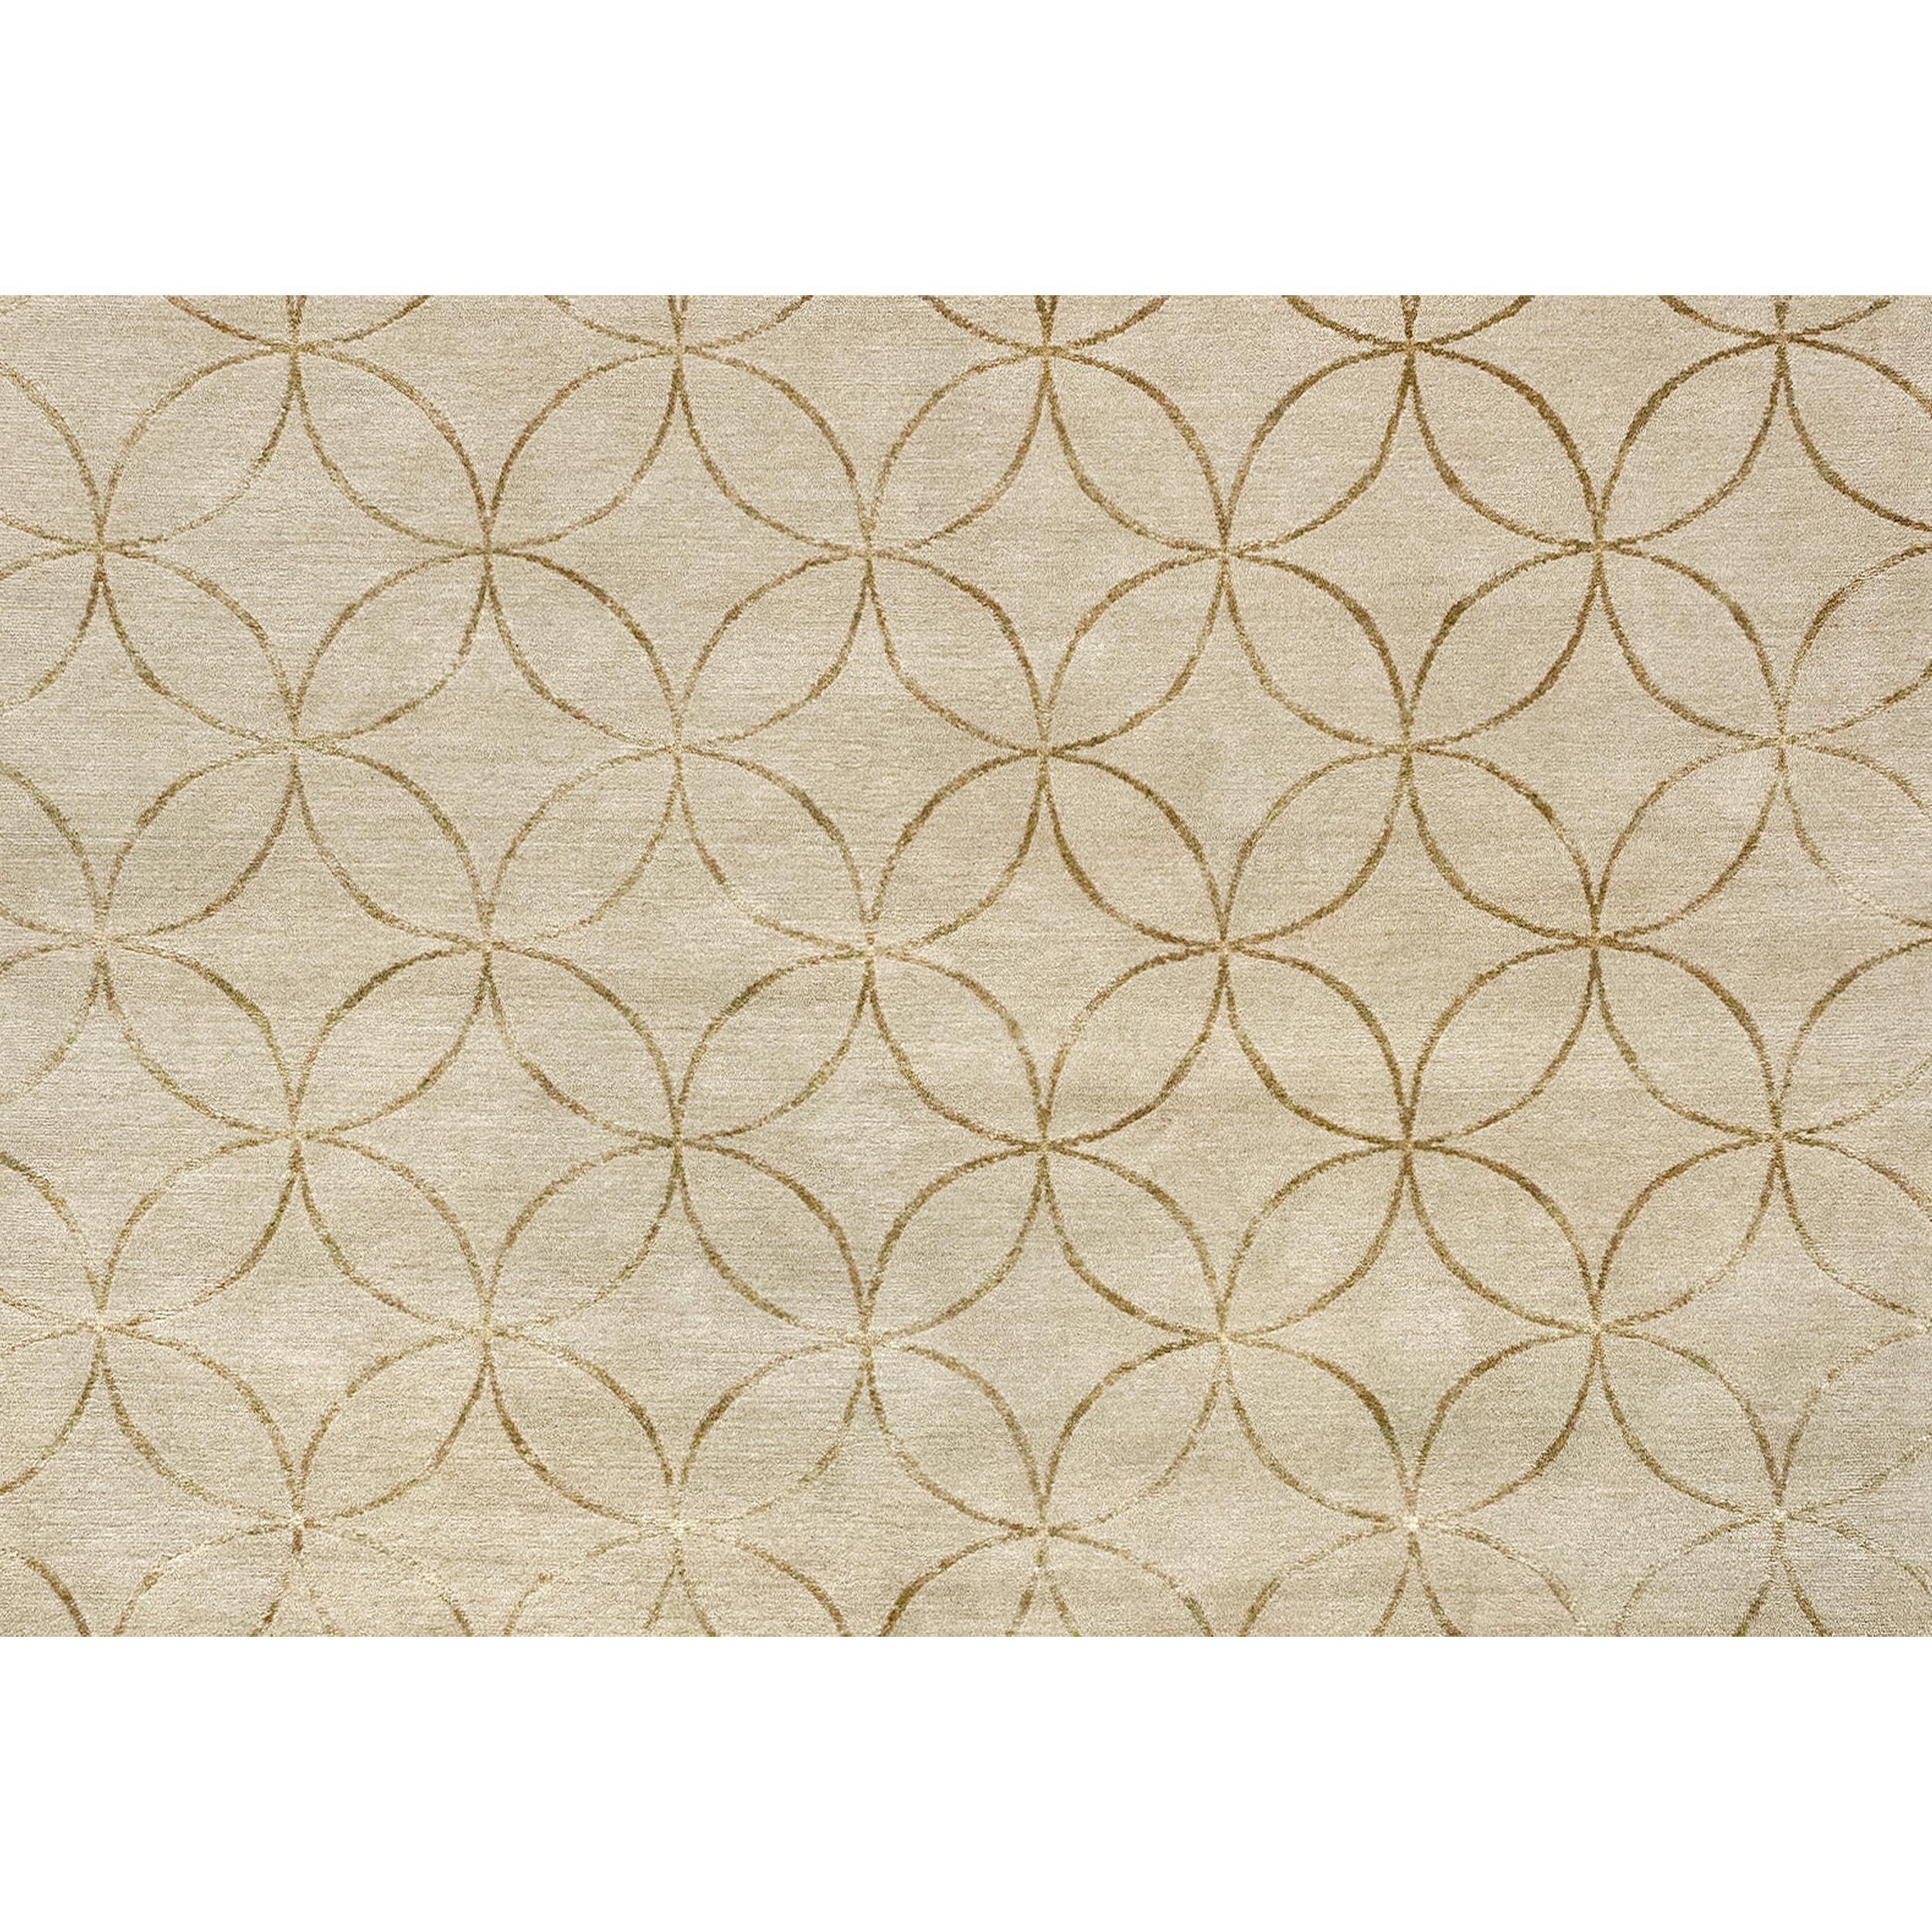 Luxury Modern Hand-Knotted Adaptations Circle Lattice Ivory 12x16 Rug In New Condition For Sale In Secaucus, NJ